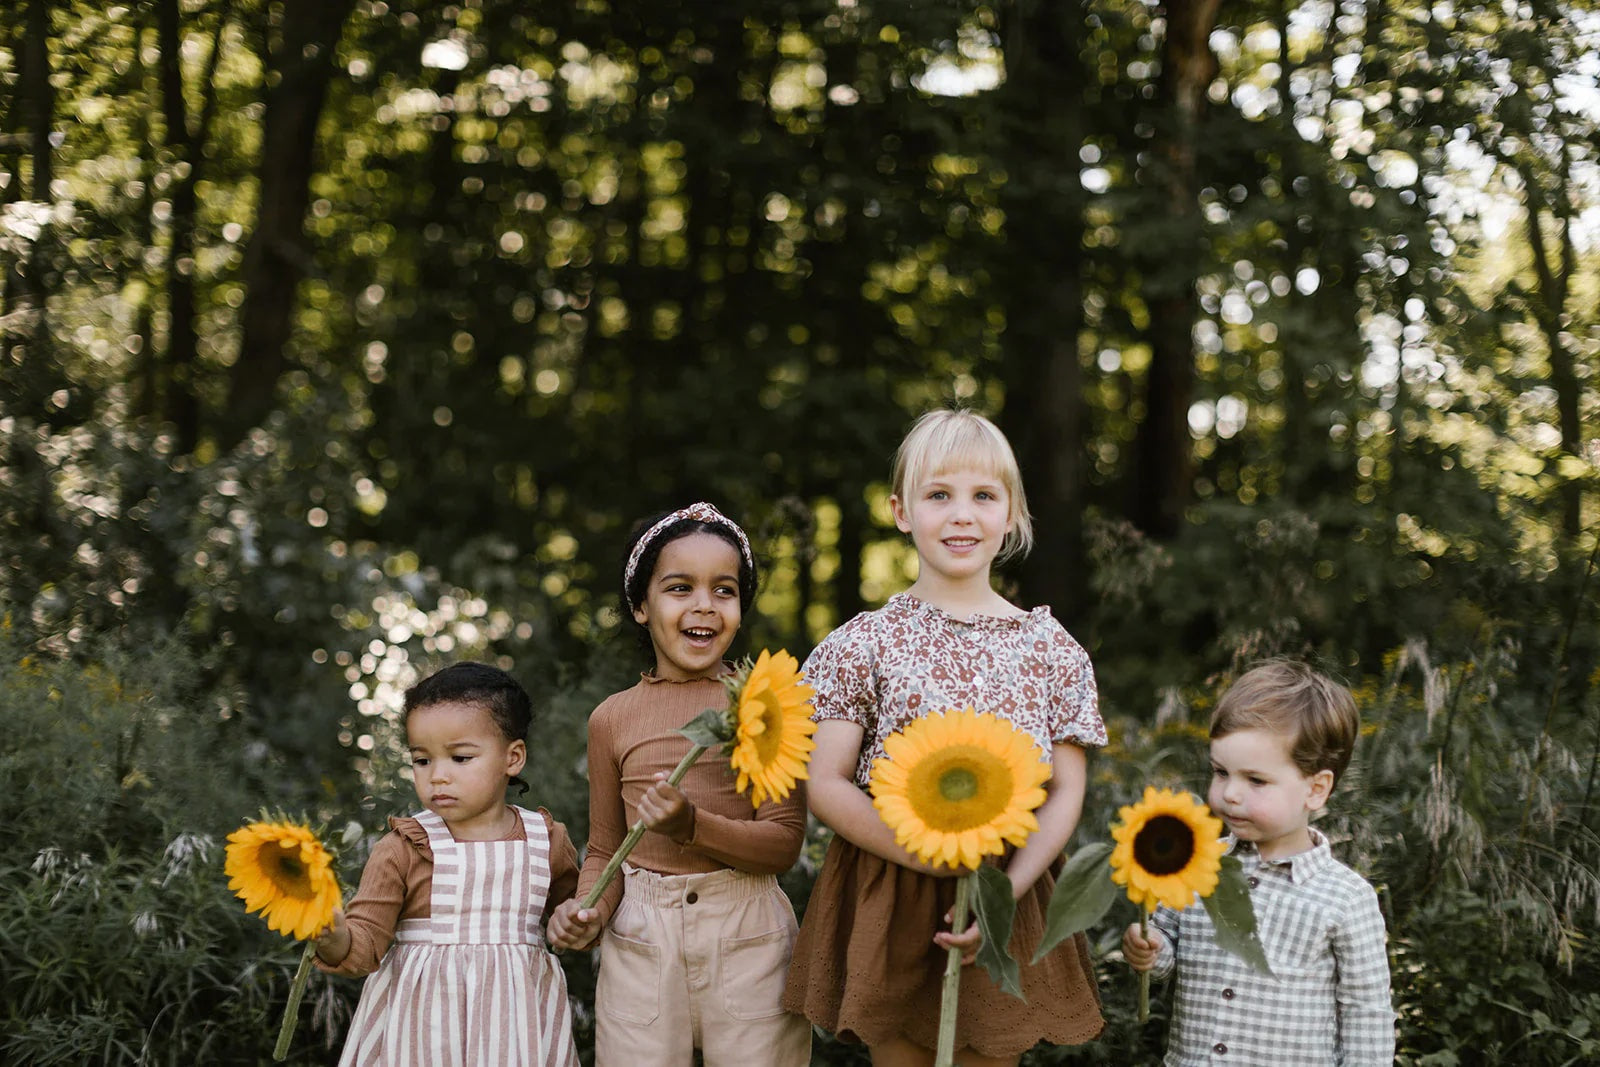 Four children standing in a forest, each holding a sunflower.